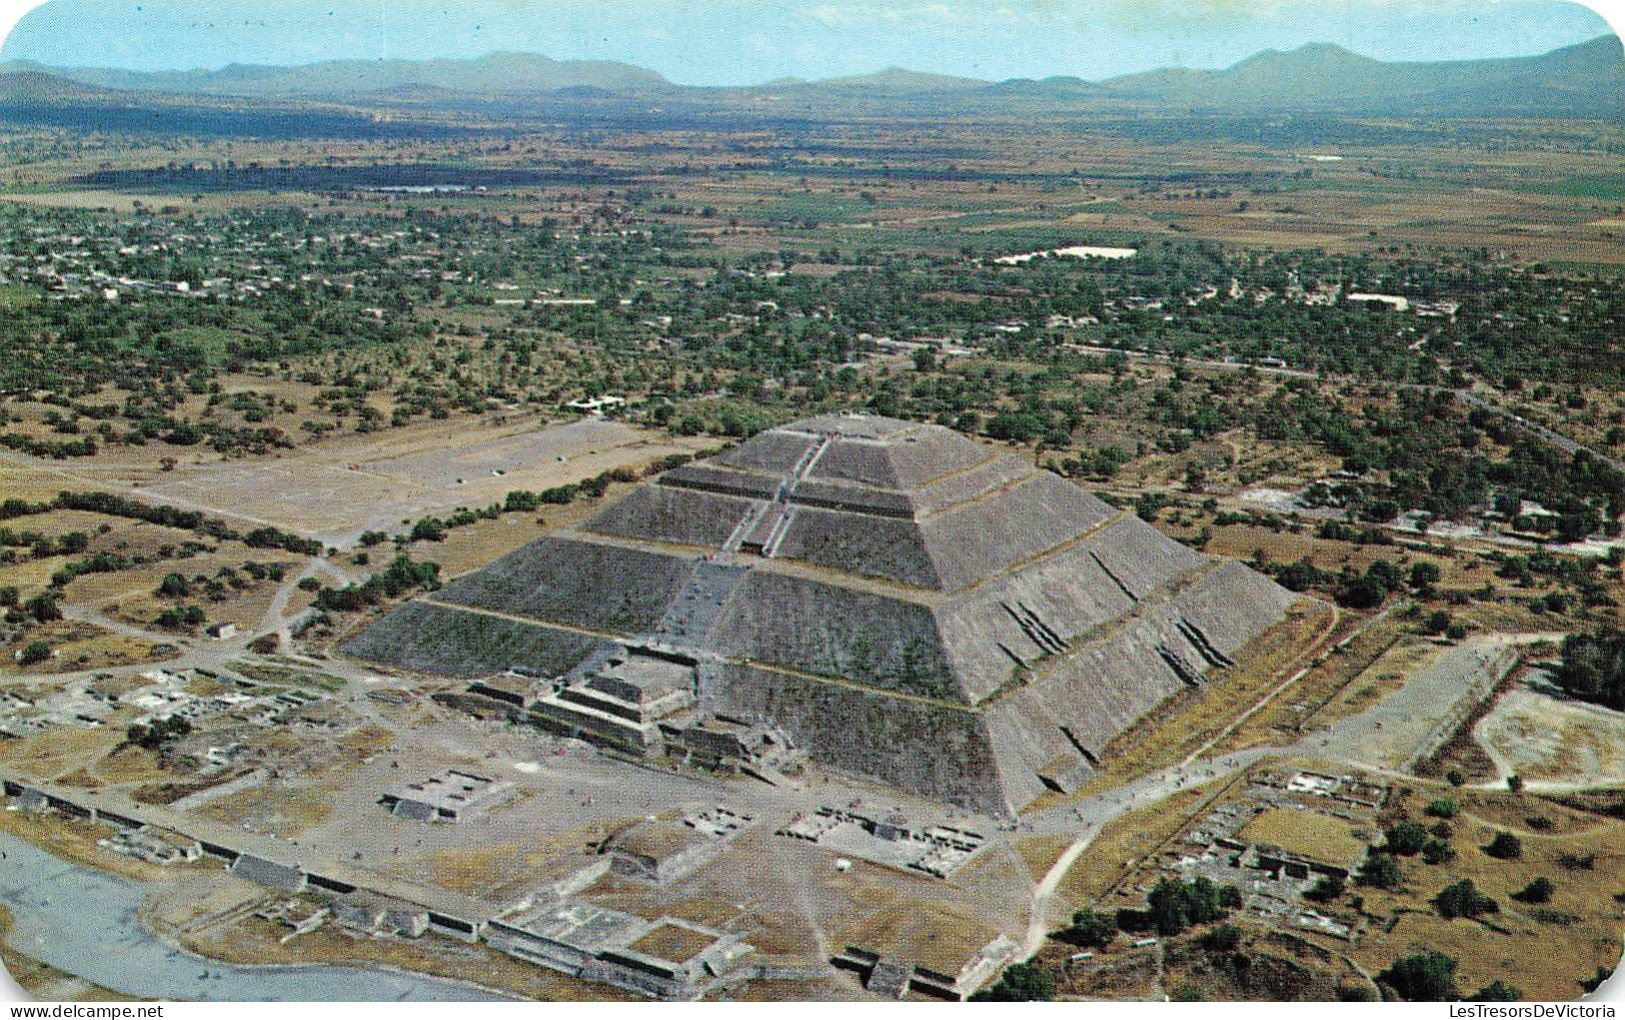 MEXIQUE - Air View Of The Pyramid Of The Sun - Teotihuacan Archaeological Zone - Vue Générale - Carte Postale - Mexique